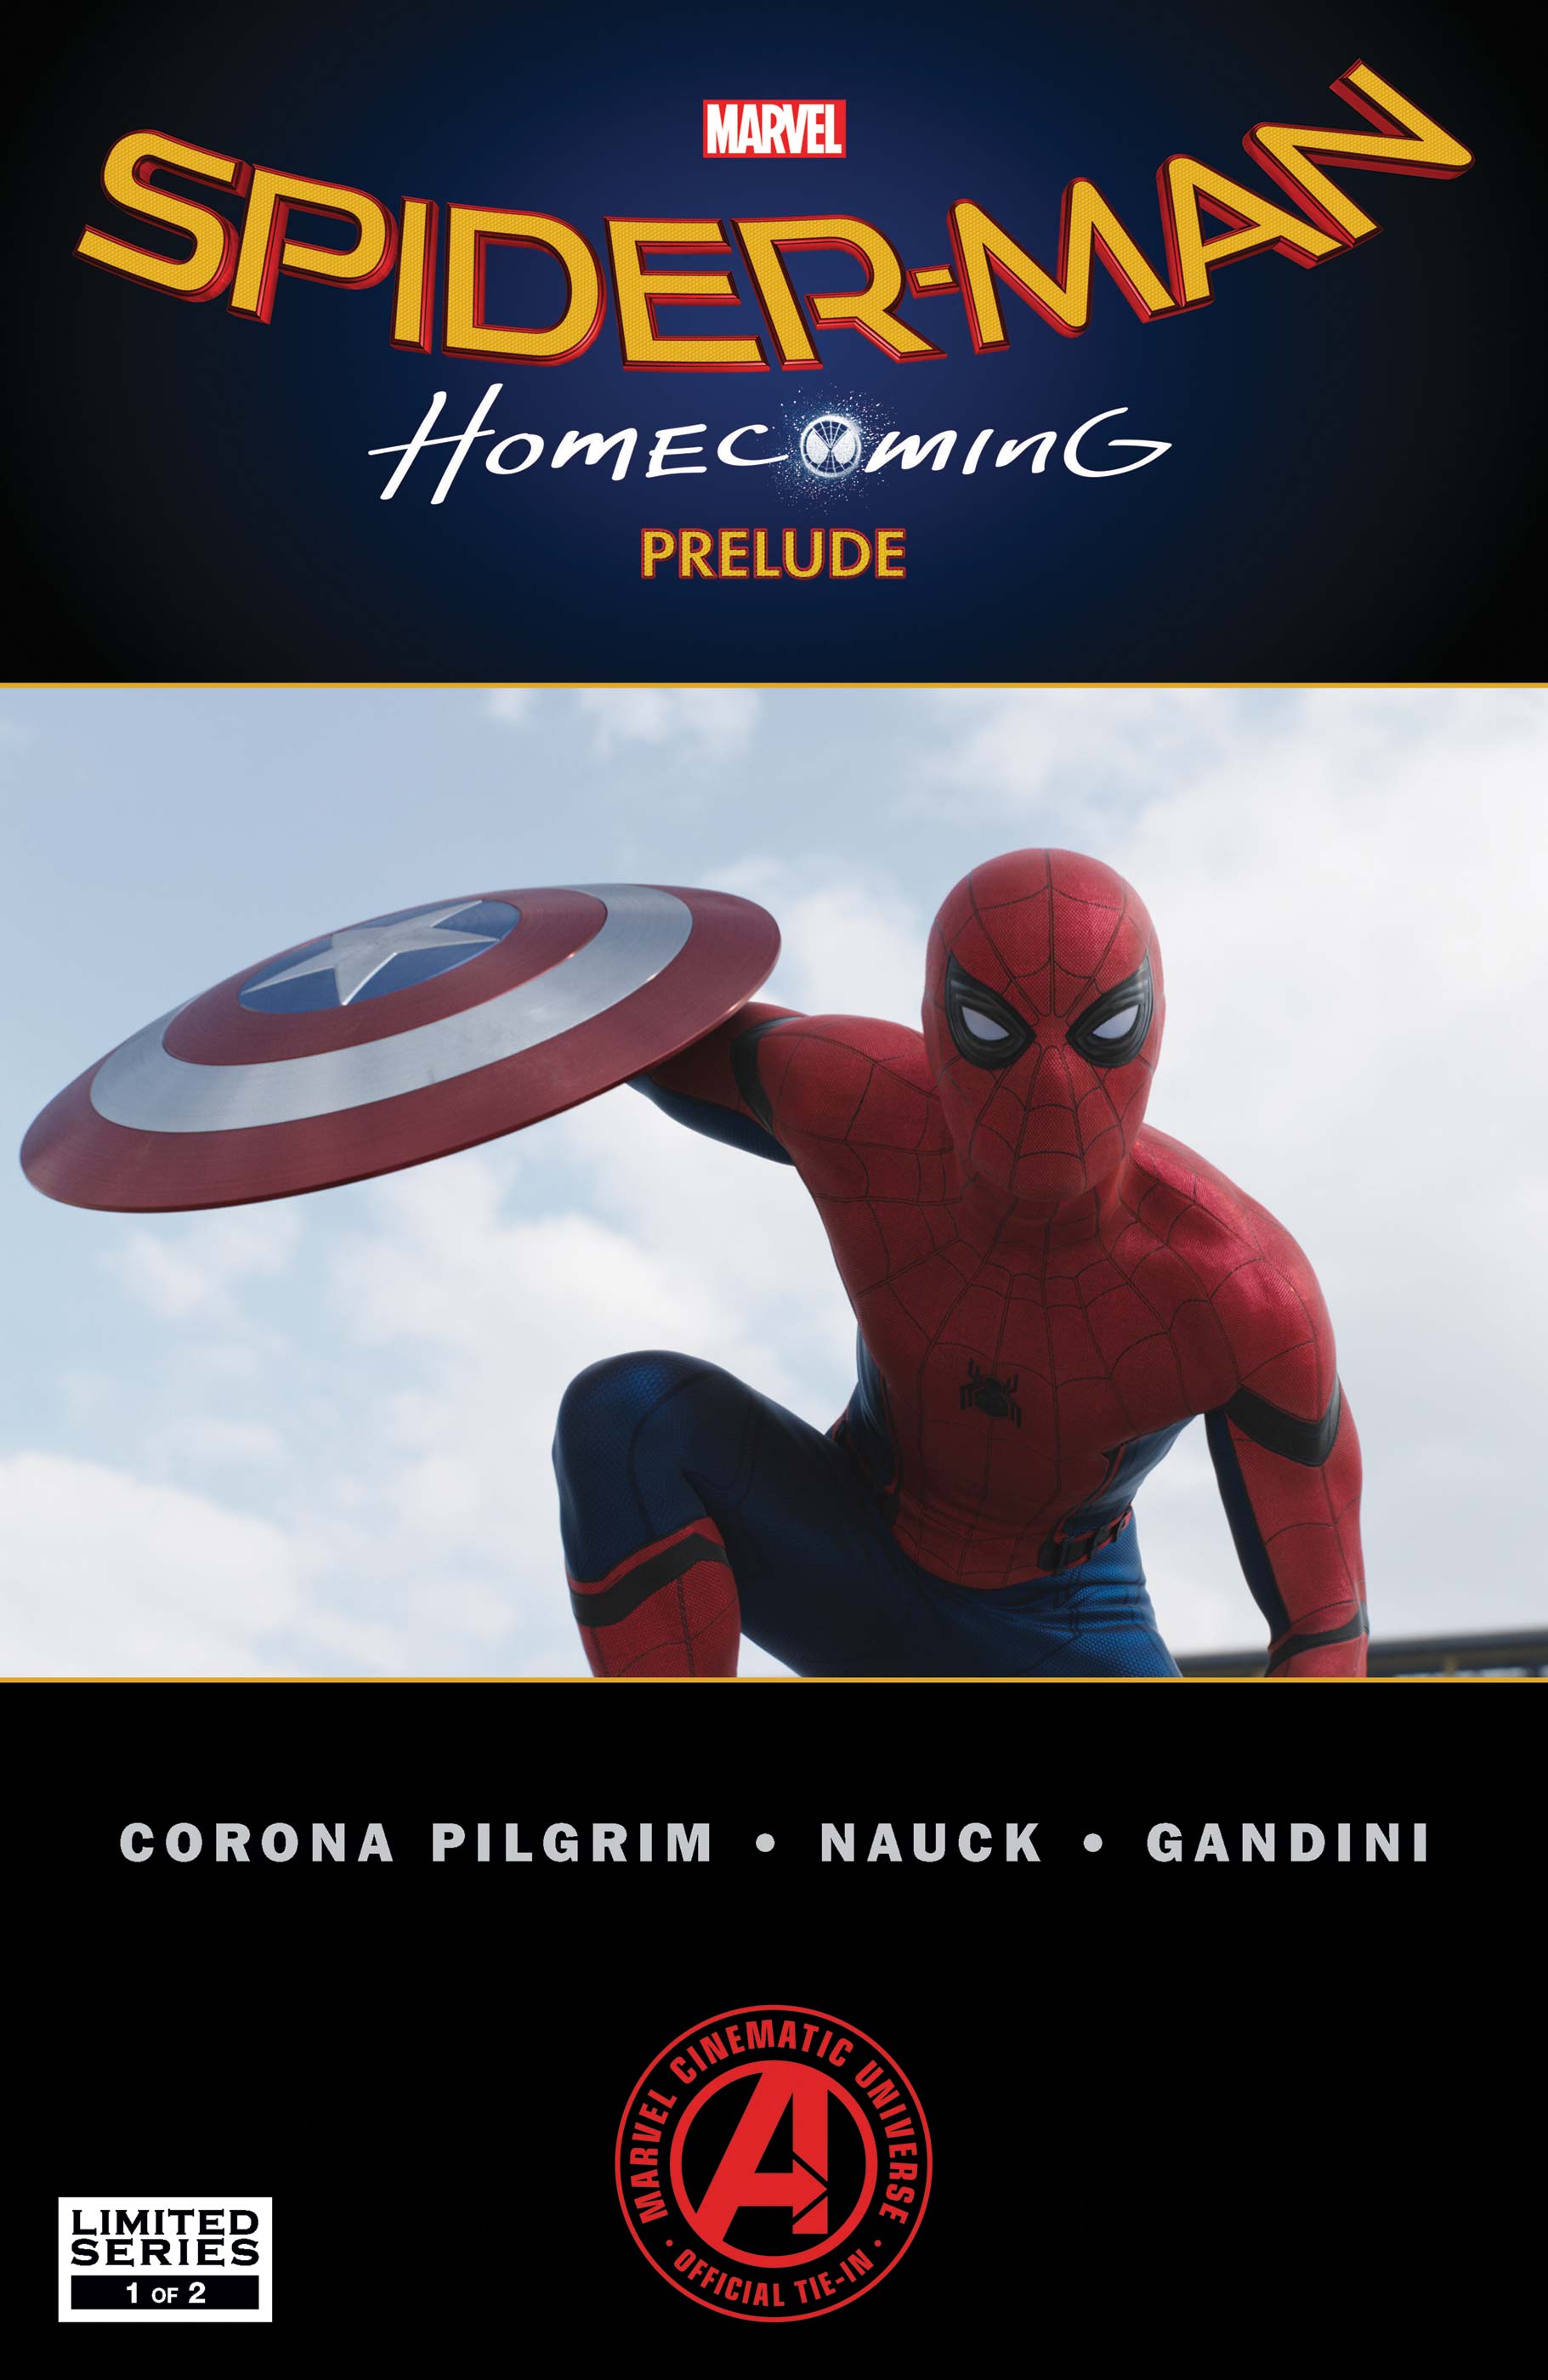 Marvel's Spider-Man: Homecoming Prelude (2017) #1